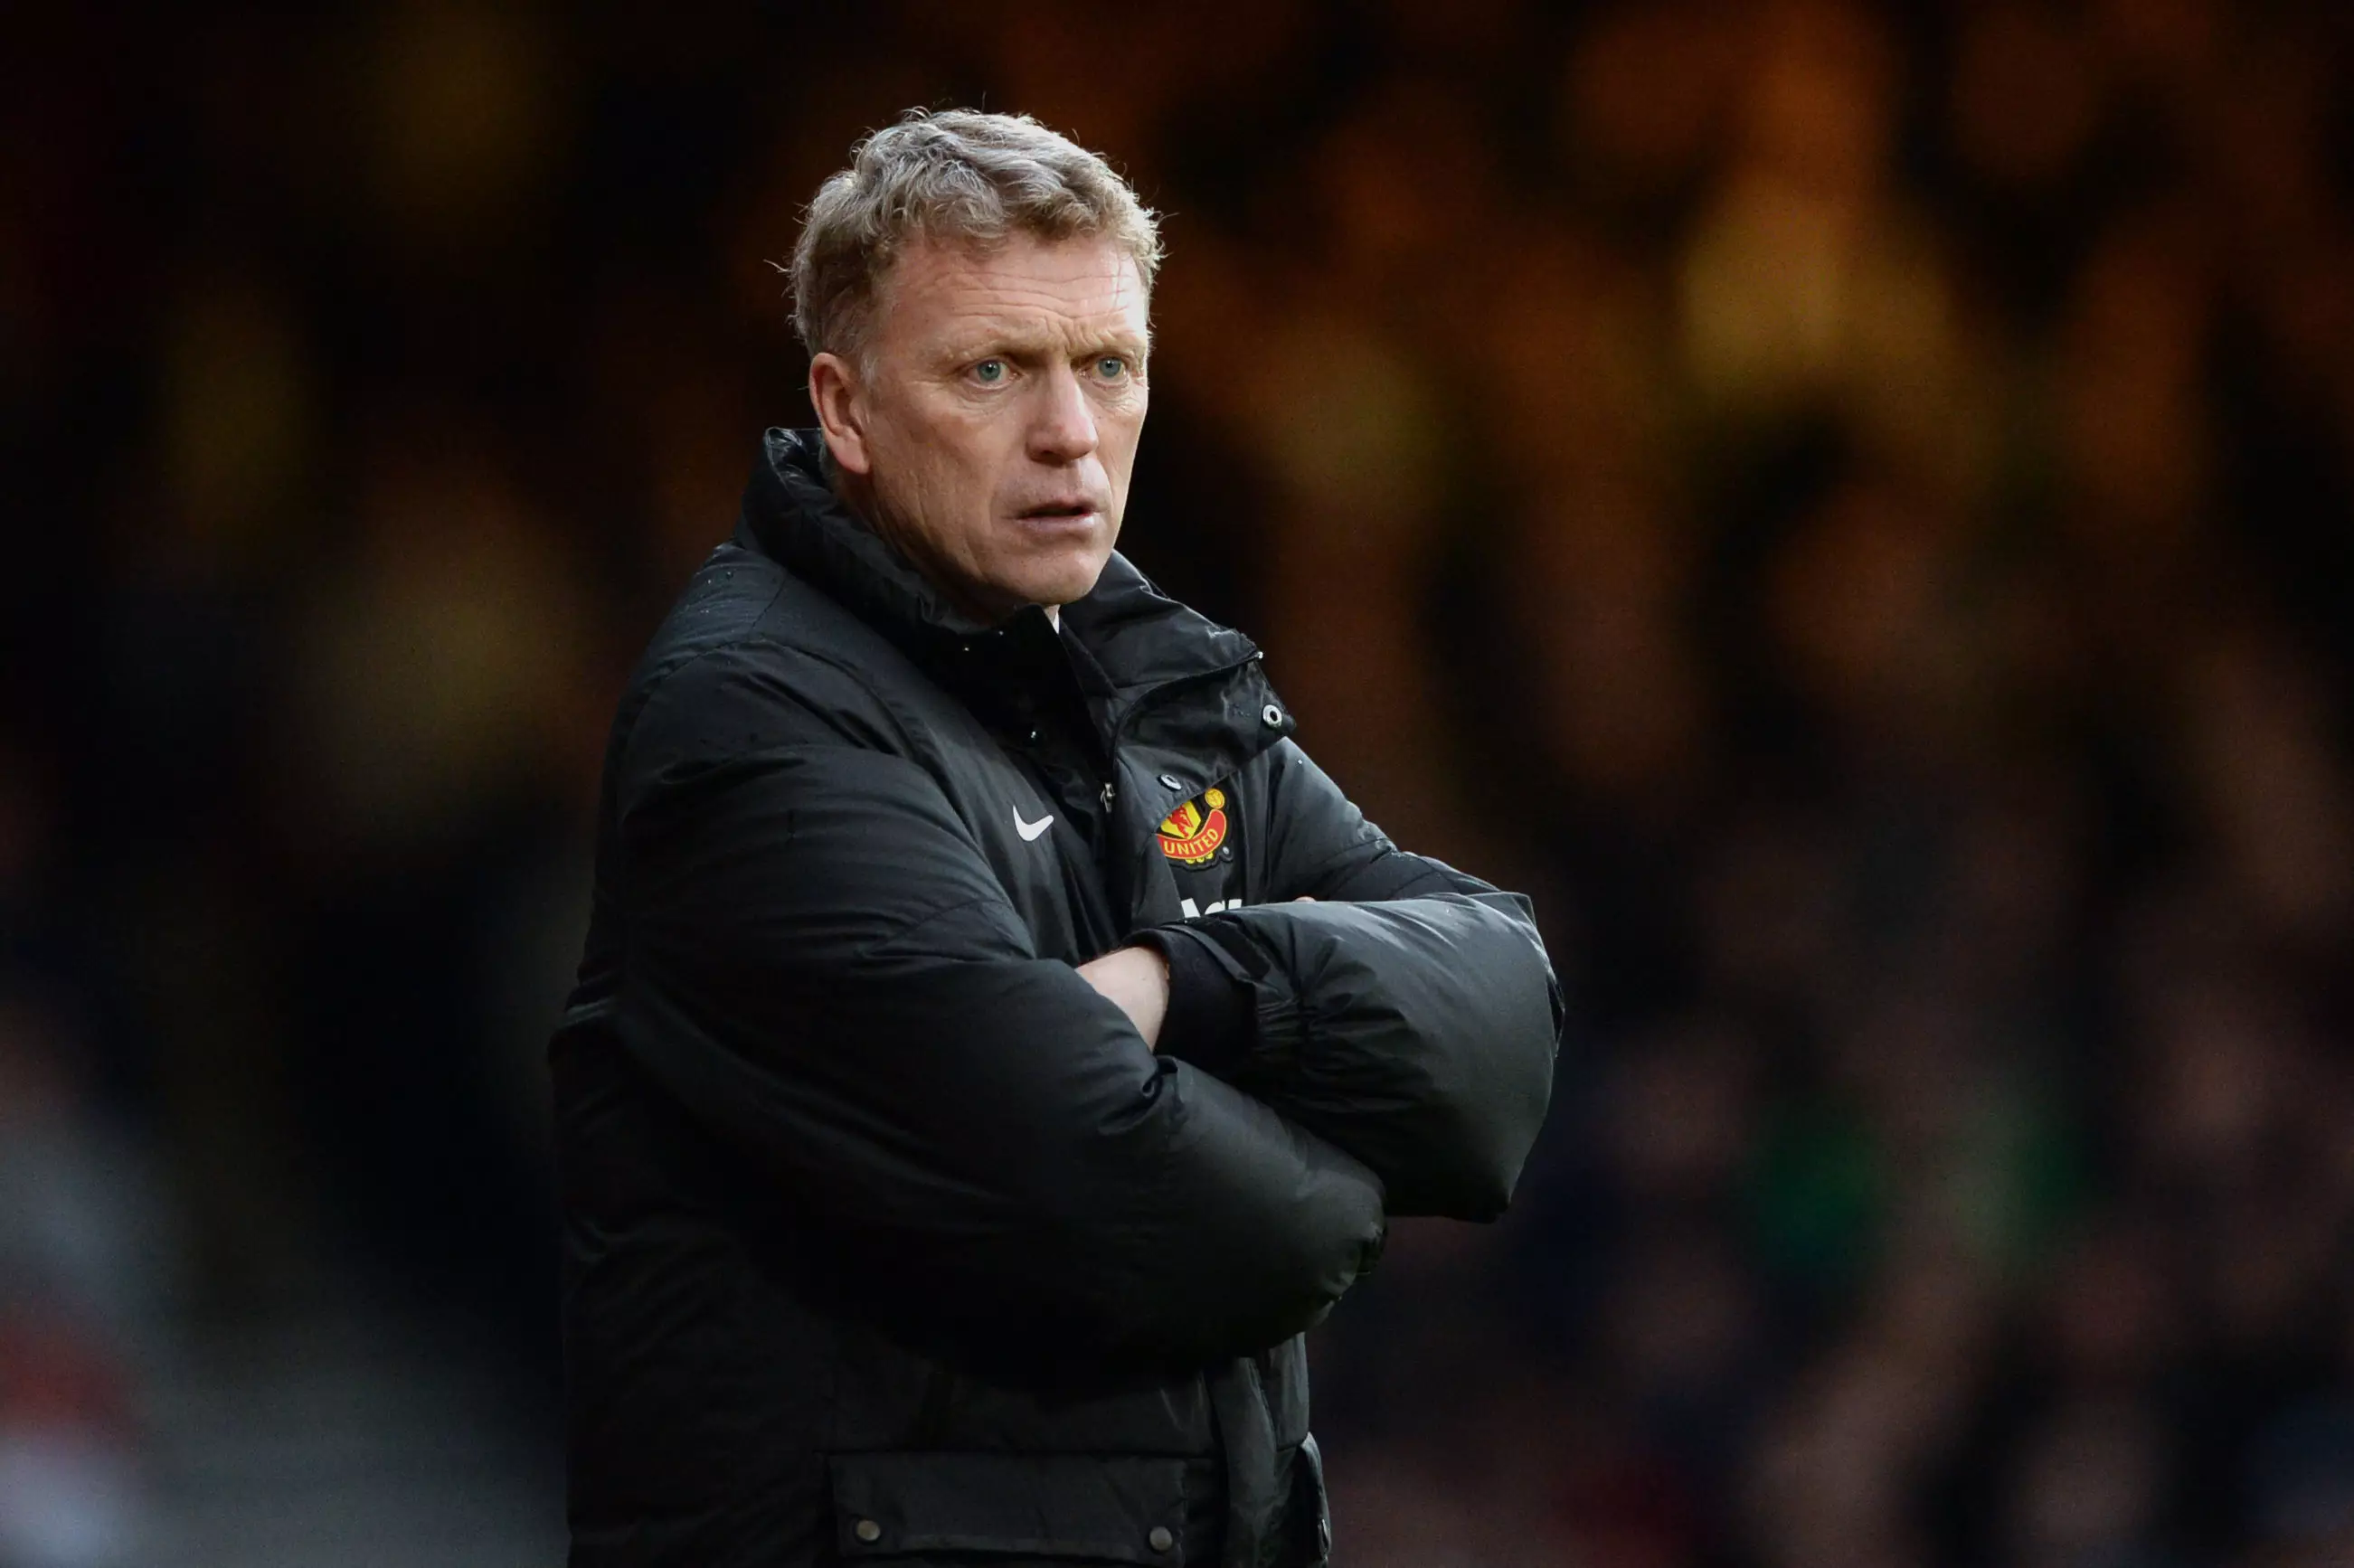 David Moyes Wanted To Bring Champions League Winner To Old Trafford